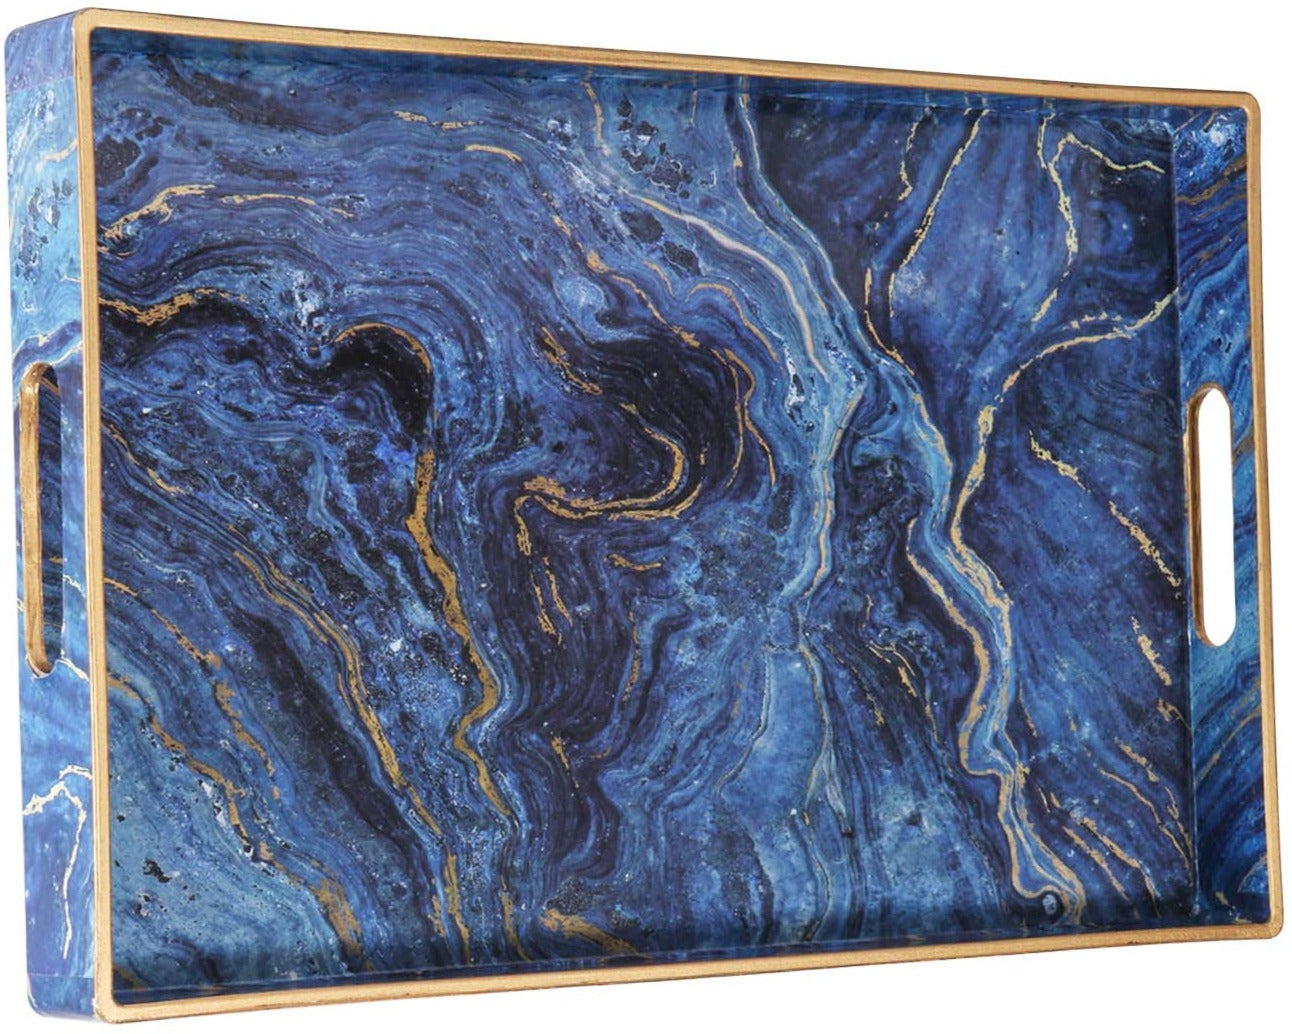 Decorative Tray, Marbling Plastic Tray with Handles, Rectangular Vanity Tray and Serving Tray for Bathroom, Kitchen, Ottoman and Coffee Table, 15.6” x 10.2” x 1.5", Blue. - e4cents